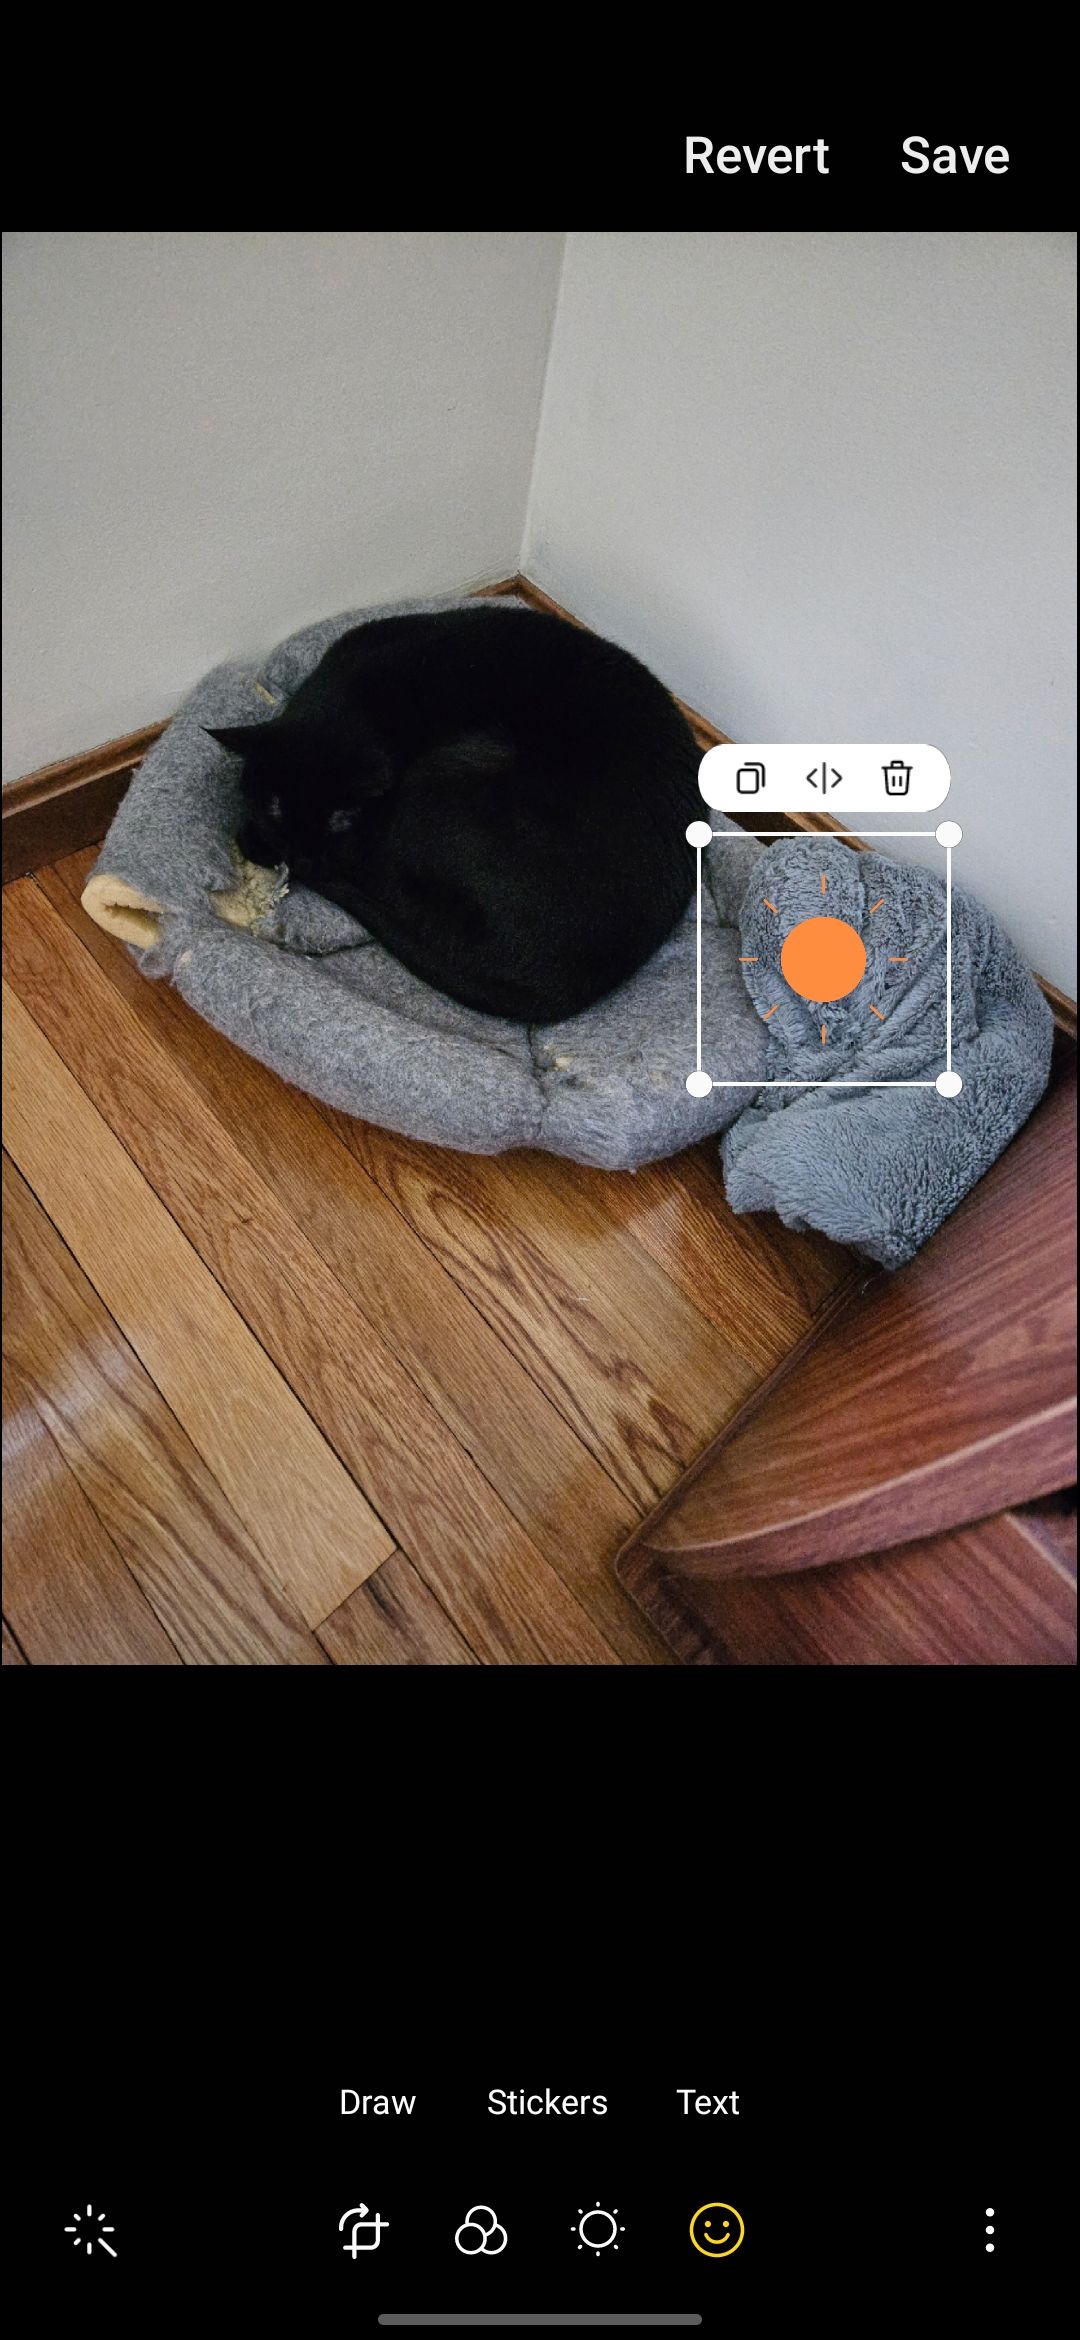 Editing a sticker on a photo in the Samsung Gallery app